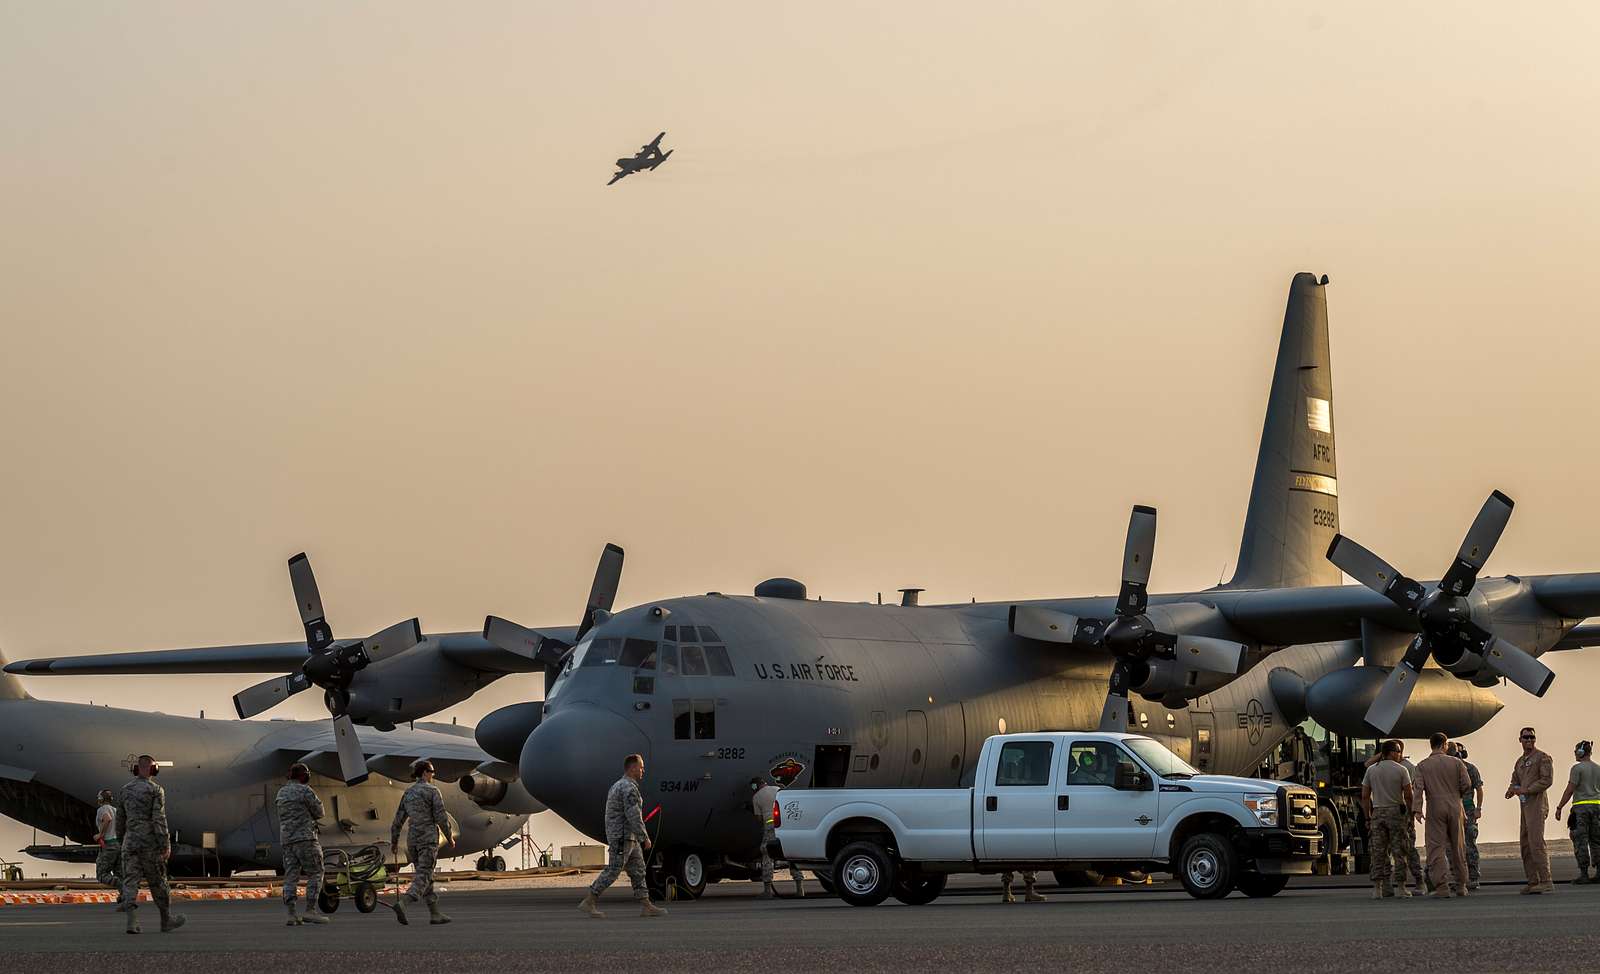 https://cdn2.picryl.com/photo/2014/09/12/airmen-of-the-934th-air-wing-unload-after-landing-at-372a91-1600.jpg